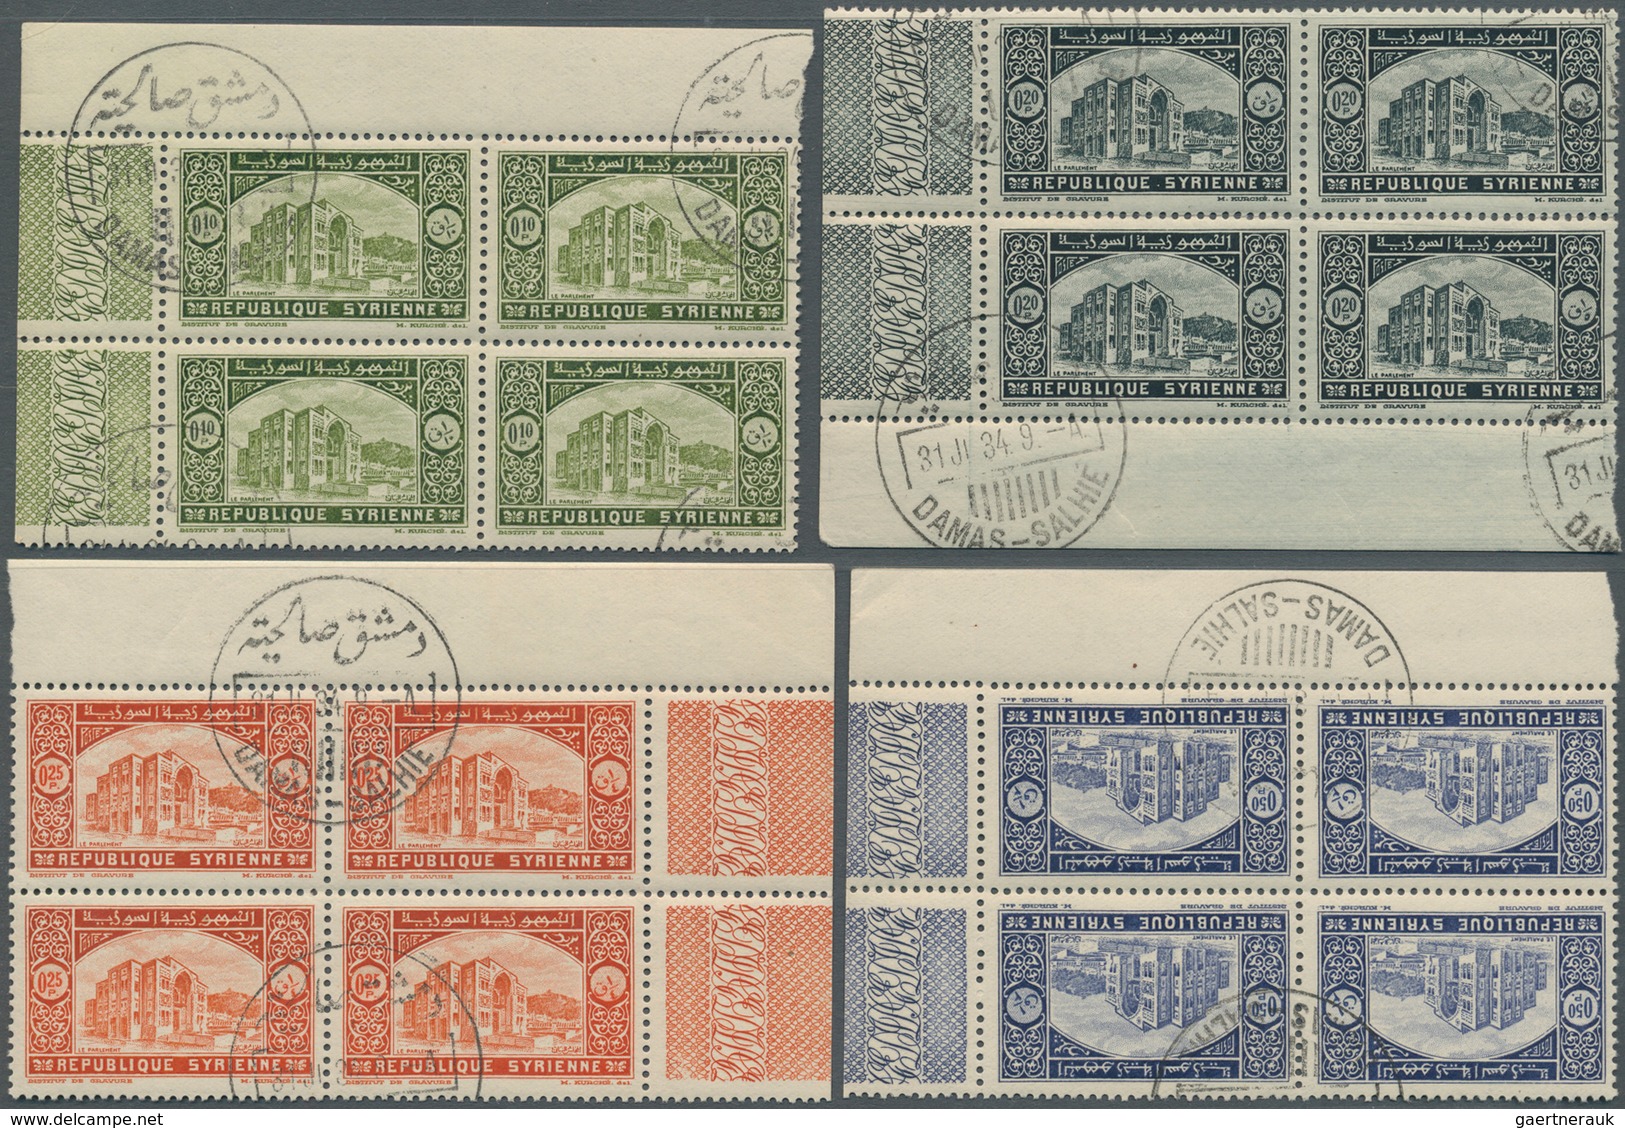 09869 Syrien: 1934, 10th Anniversary of Republic, 0.10pi. to 100pi., complete set of 29 values as marginal